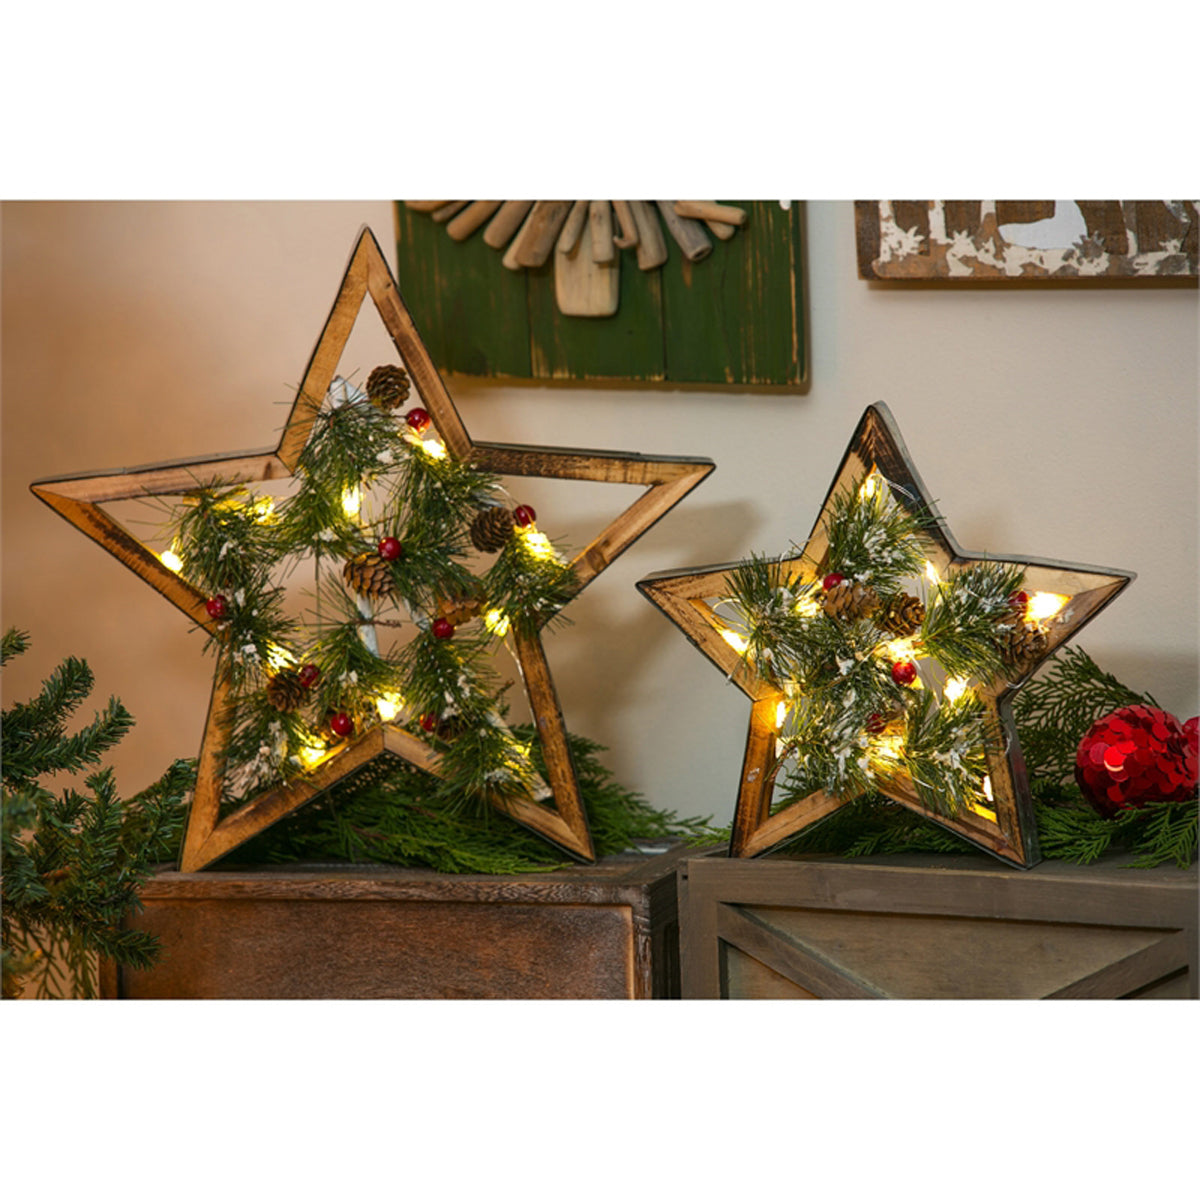 Wooden Star Table Decor, set of 2